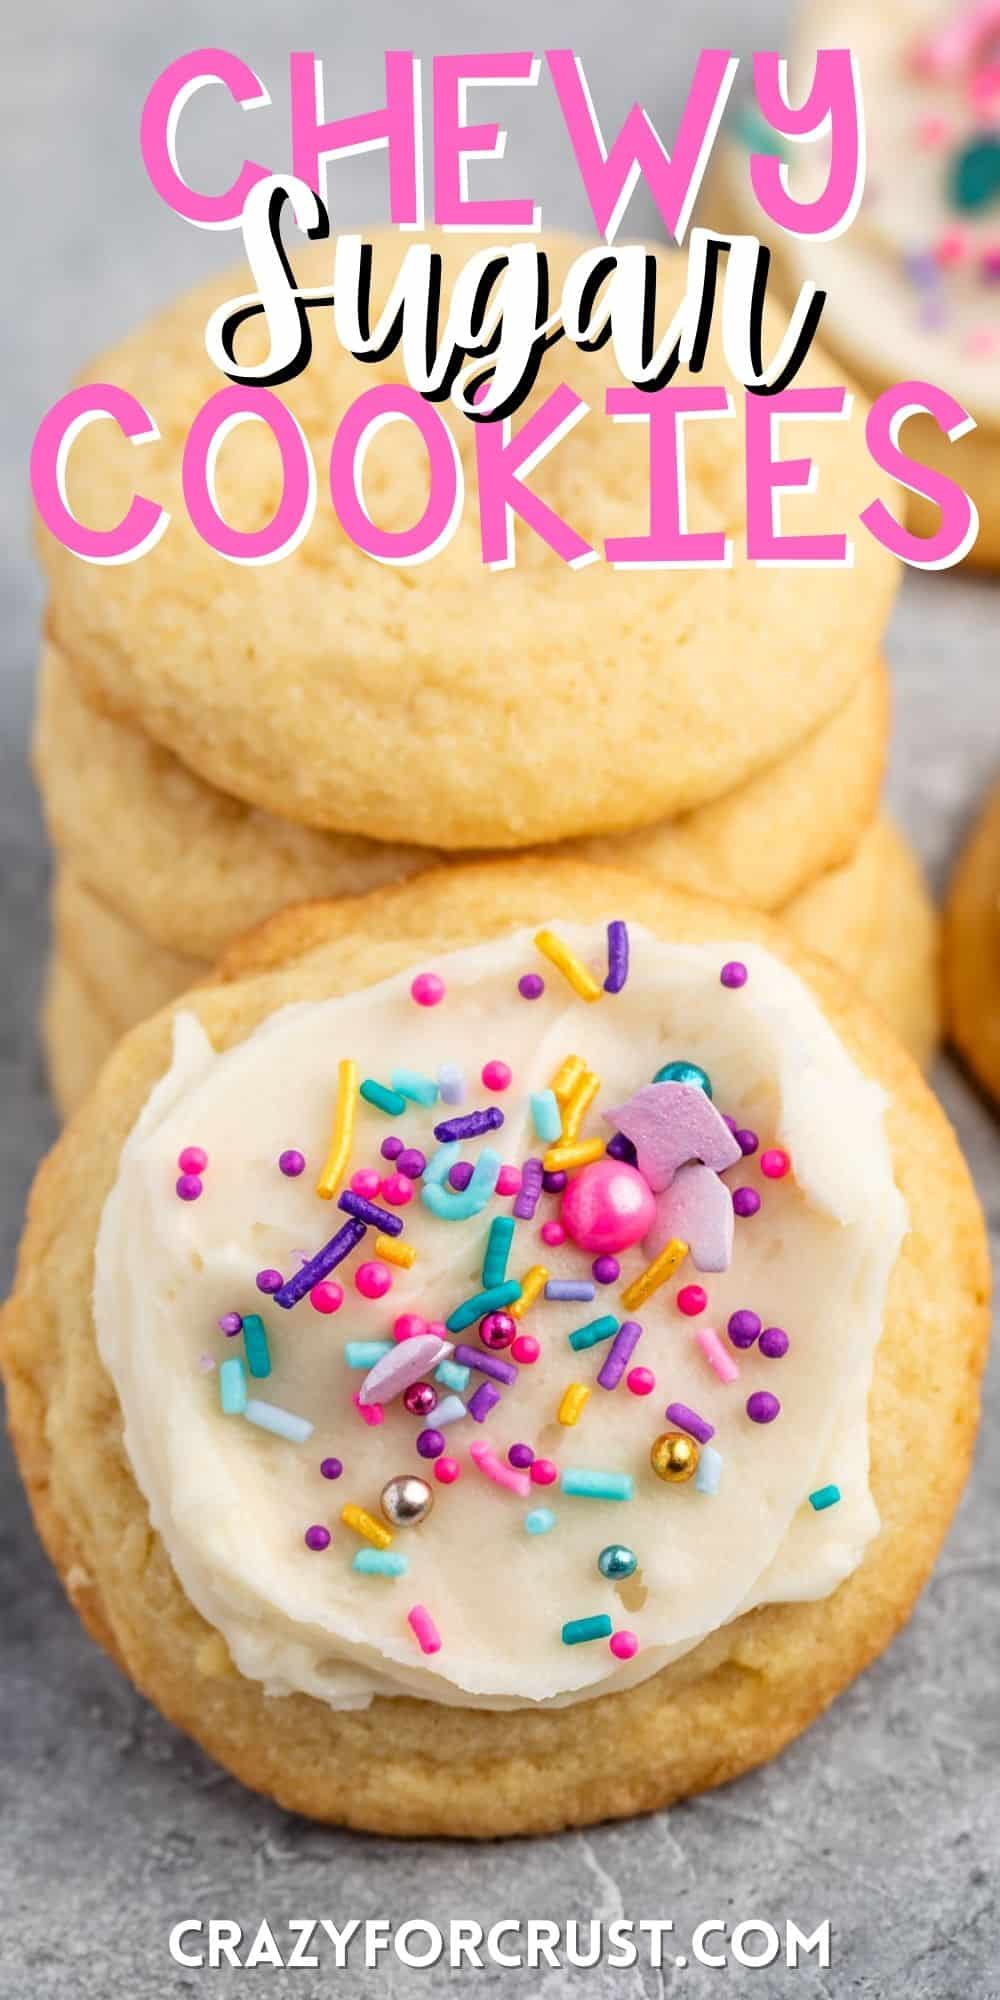 sugar cookie with white frosting and pink and blue sprinkles with words on the image.